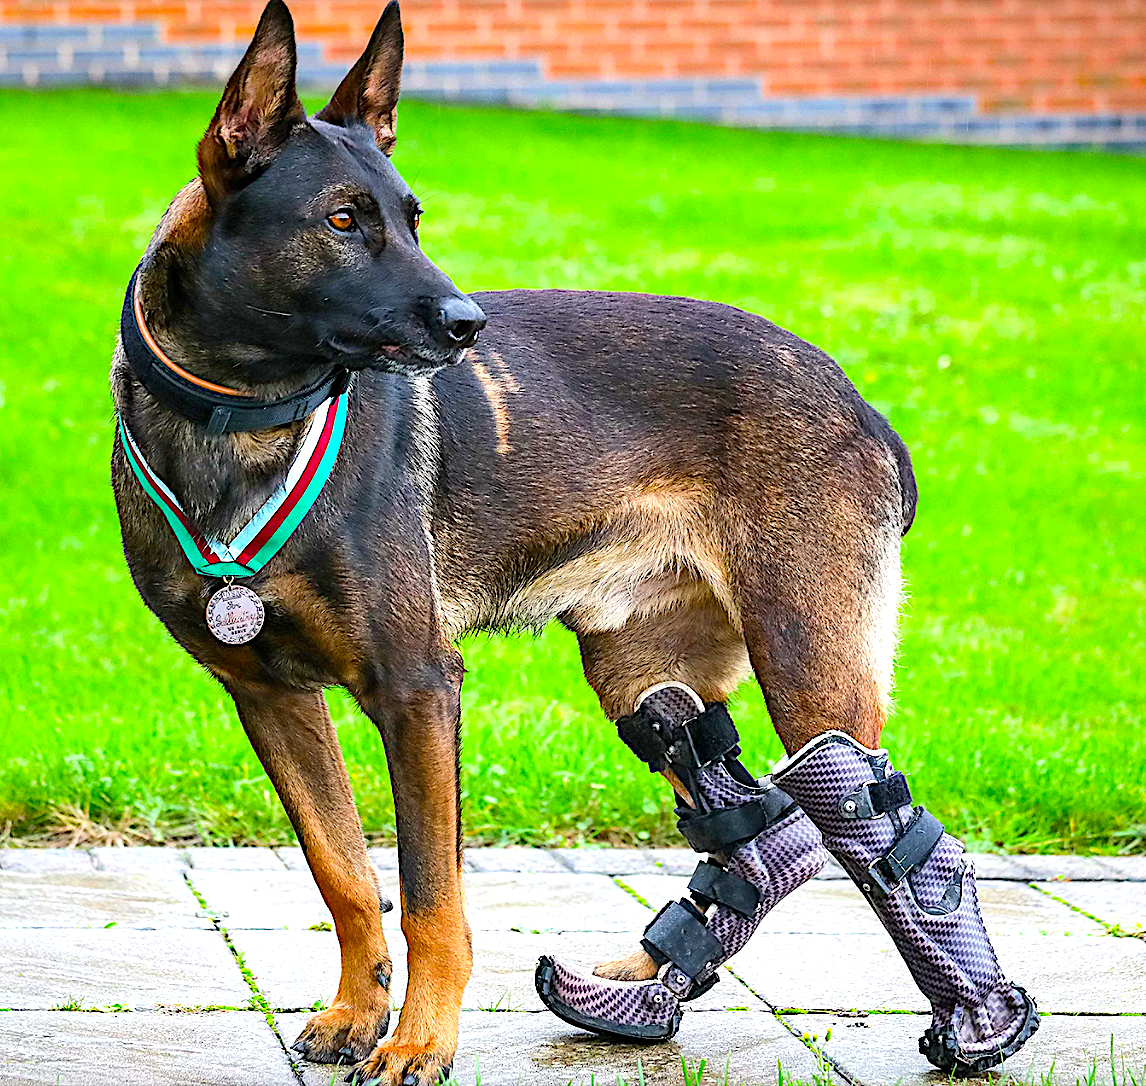 Hero Dog with Prosthetic Paws that Survived Gunfire to Save Others Given Highest Animal Honor